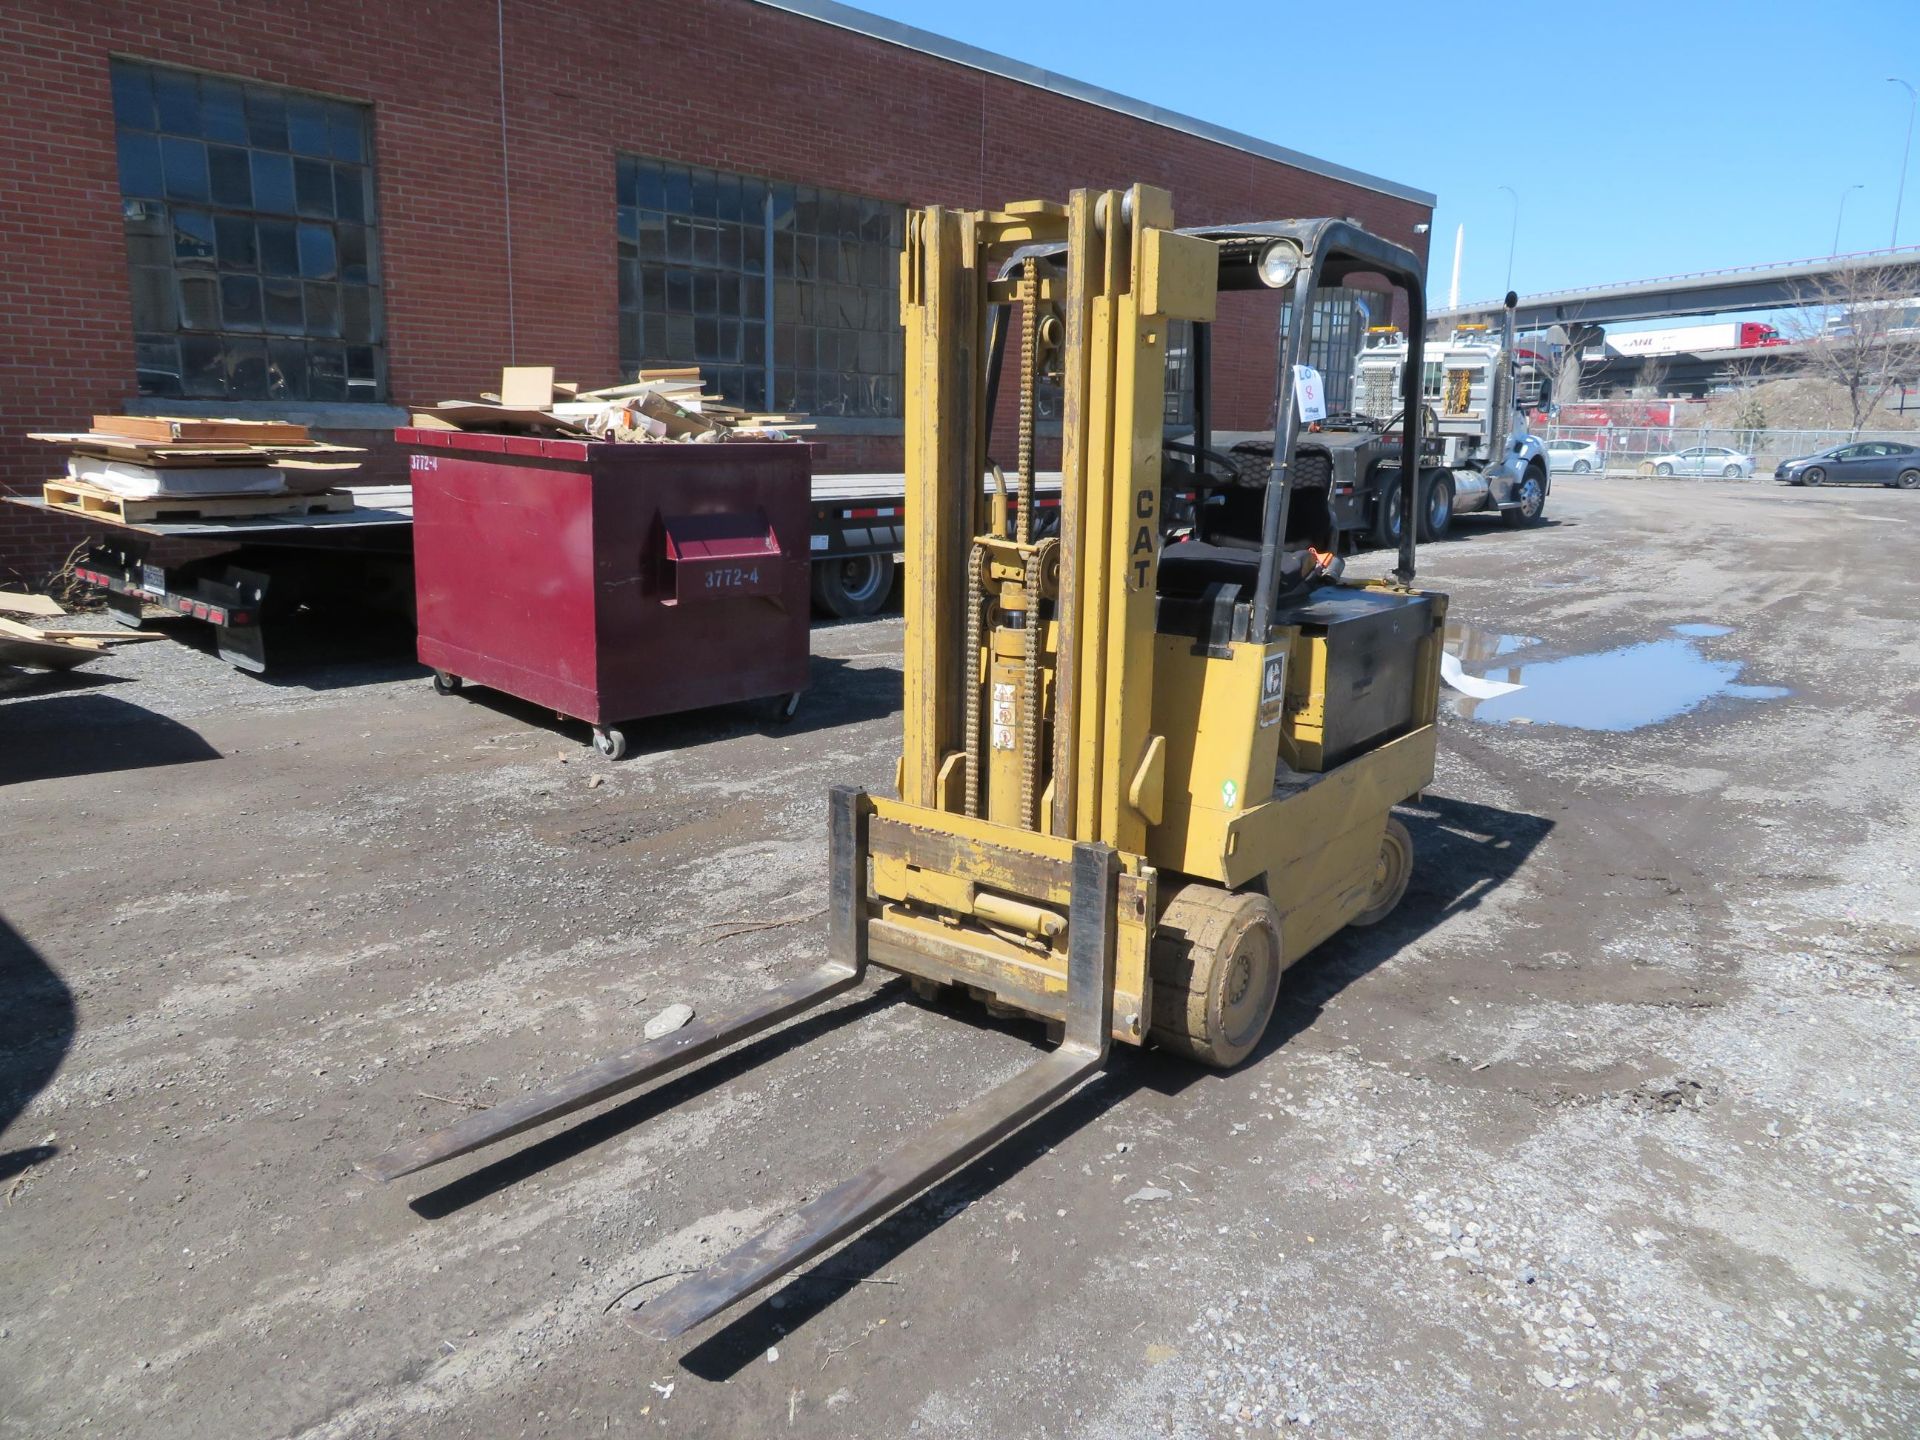 CATERPILLAR electric fork lift, Mod# M408, cap: 4,000 LBS, 3 sections, side shift, 36/48 Volts,